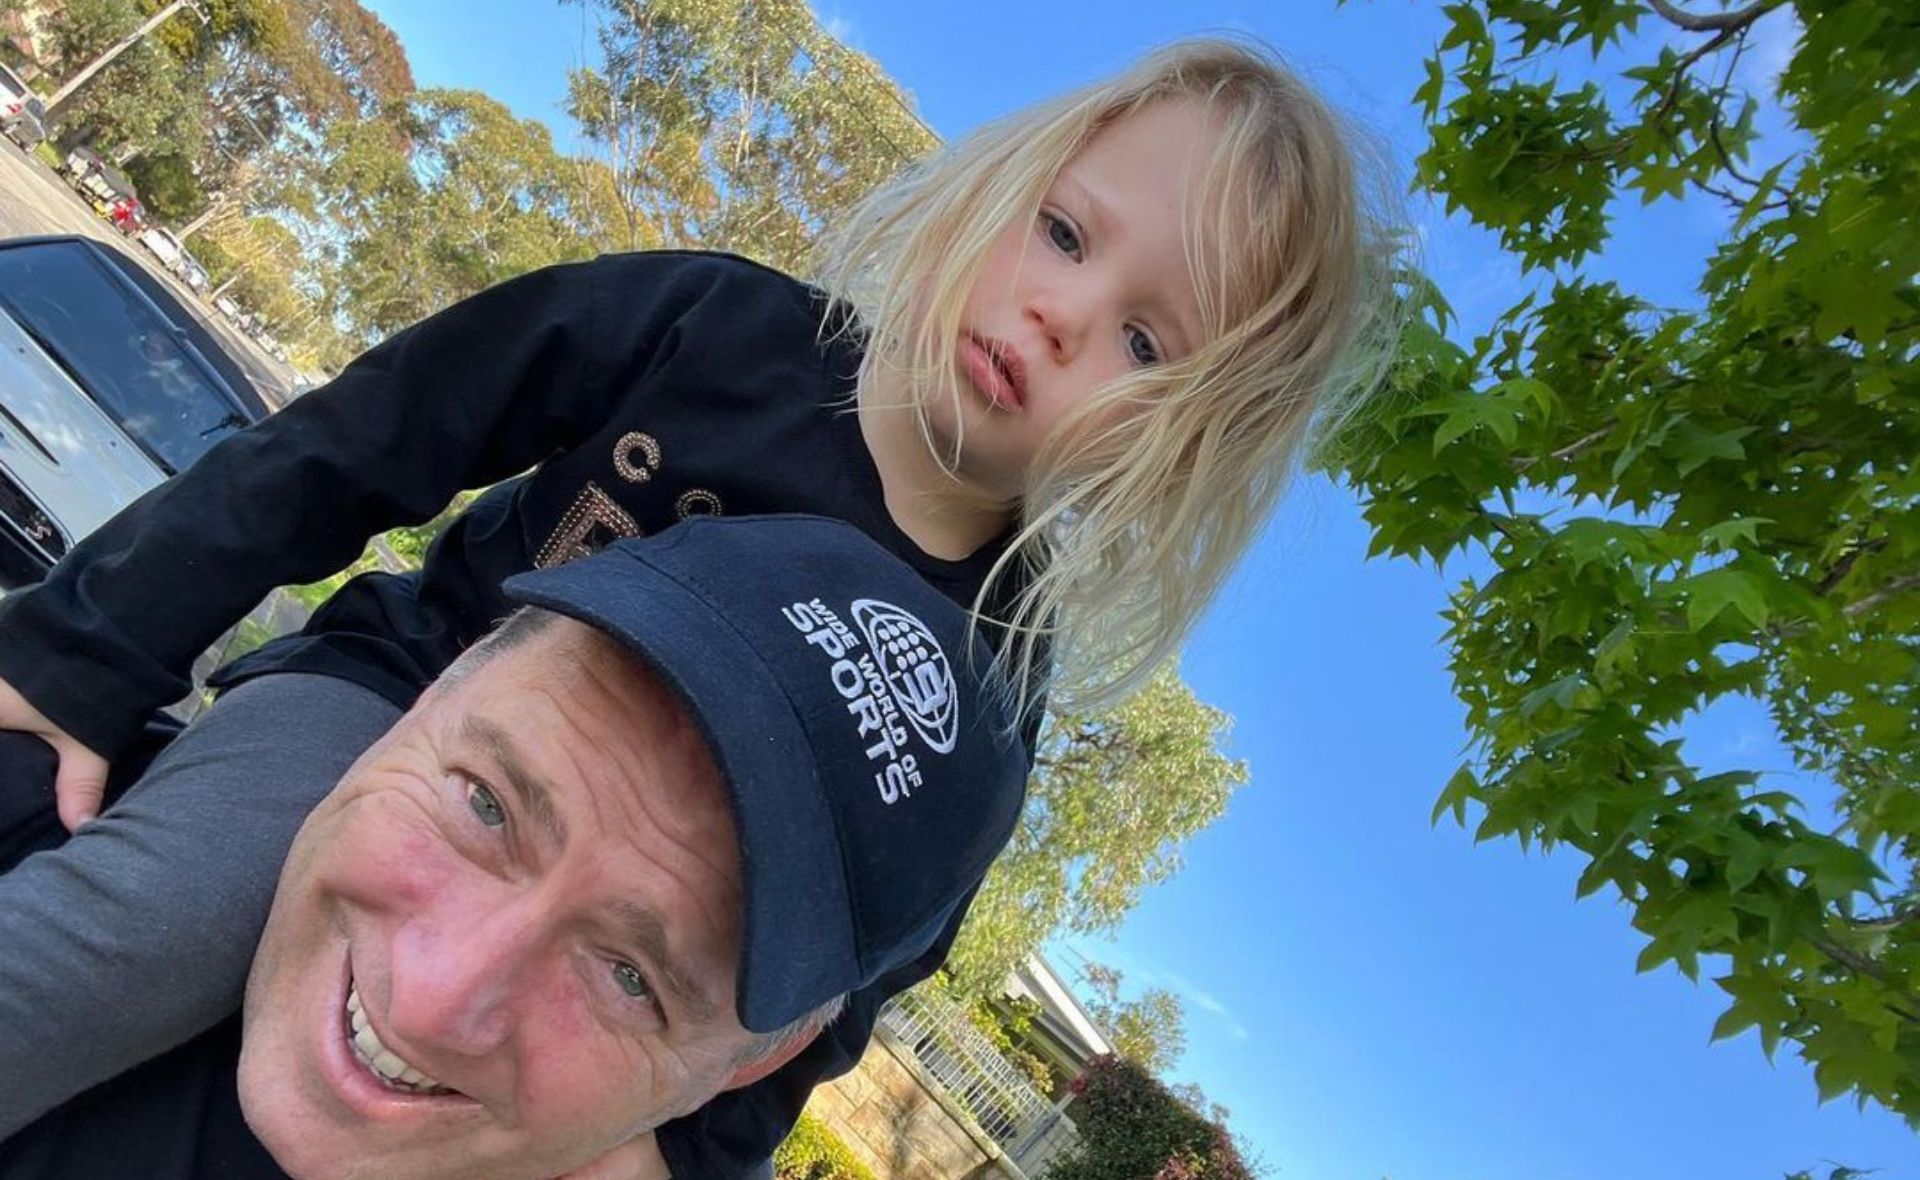 “So not funny to show your kid!”: Fans divided after Karl Stefanovic shares “inappropriate” joke with his daughter Harper